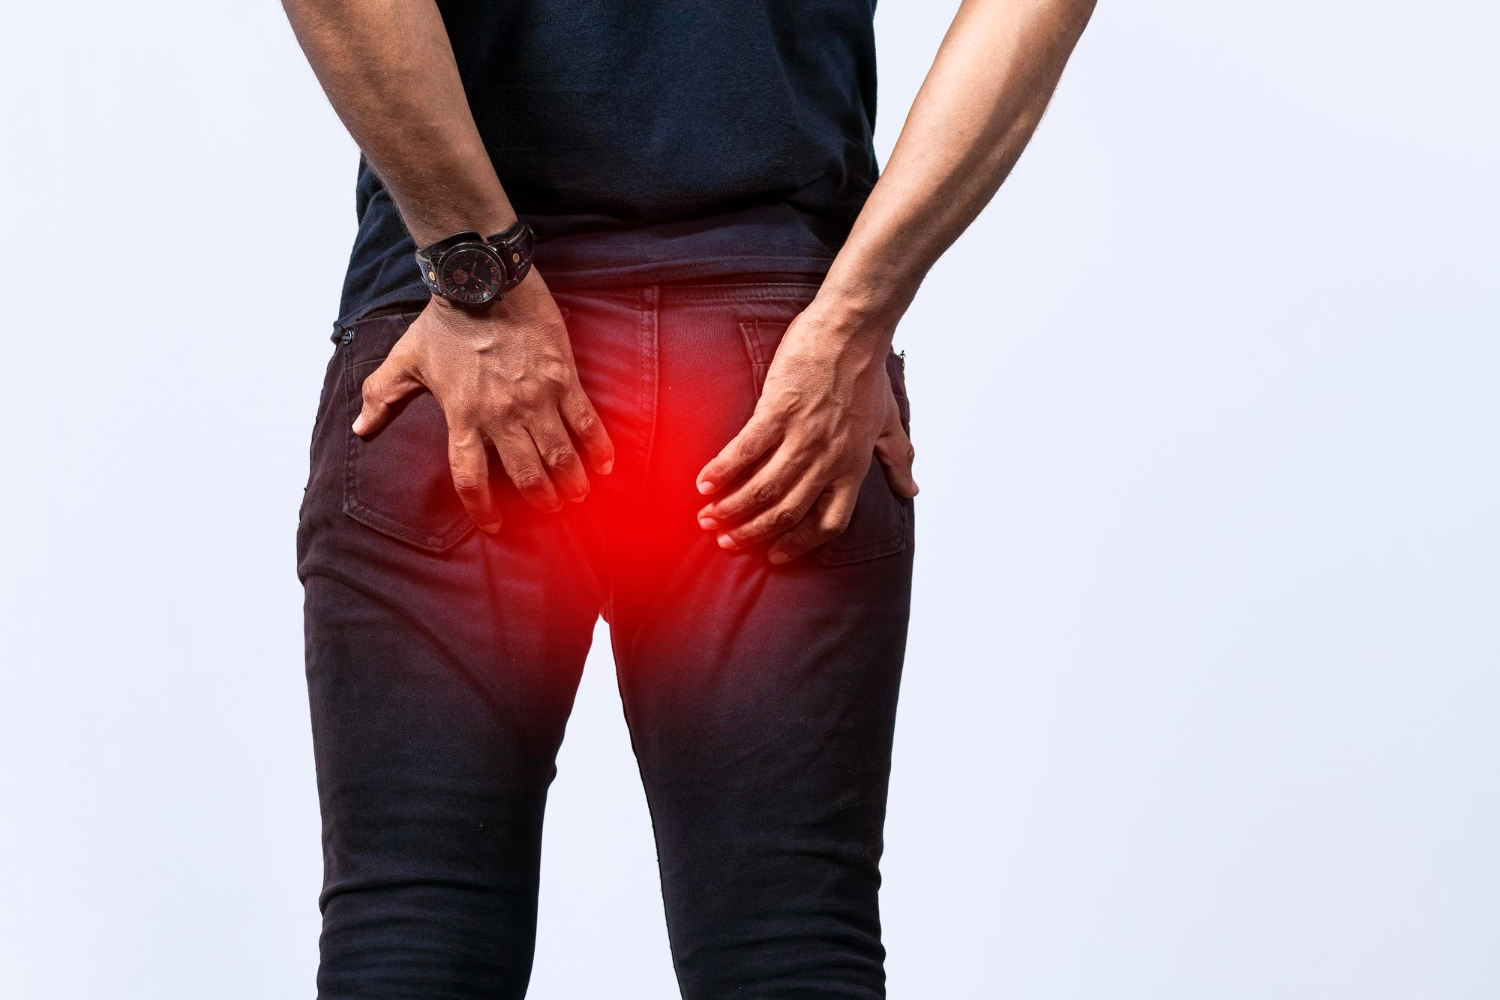 causes-and-symptoms-of-hip-pain-guide